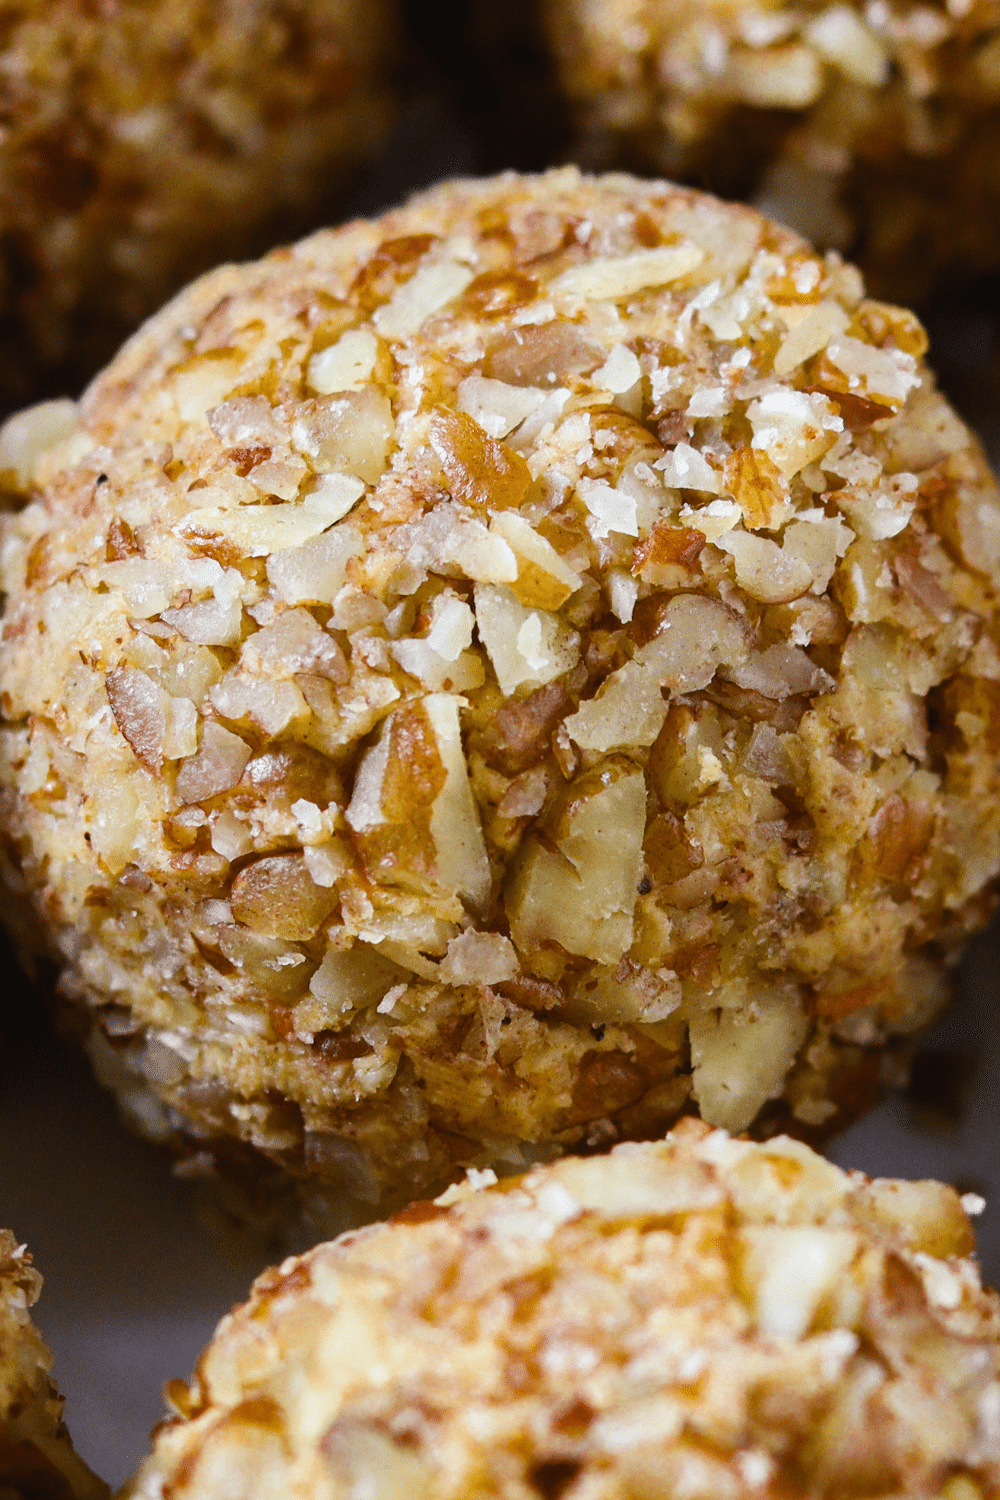 This close-up image captures the alluring details of carrot cake keto fat bombs. The fat bombs are expertly crafted, resembling miniature carrot cake bites. The foreground showcases a cluster of fat bombs, allowing us to admire their intricate textures and vibrant colors. Each fat bomb is compact and dense, with a moist and crumbly appearance reminiscent of traditional carrot cake. The exterior is adorned with finely grated carrots, adding a touch of visual appeal and a hint of earthy flavor. The fat bombs are delicately spiced with warm notes of cinnamon and nutmeg, further enhancing the resemblance to the beloved carrot cake dessert. With their low-carb and keto-friendly ingredients, these carrot cake fat bombs provide a guilt-free alternative to satisfy cravings while adhering to a ketogenic diet.